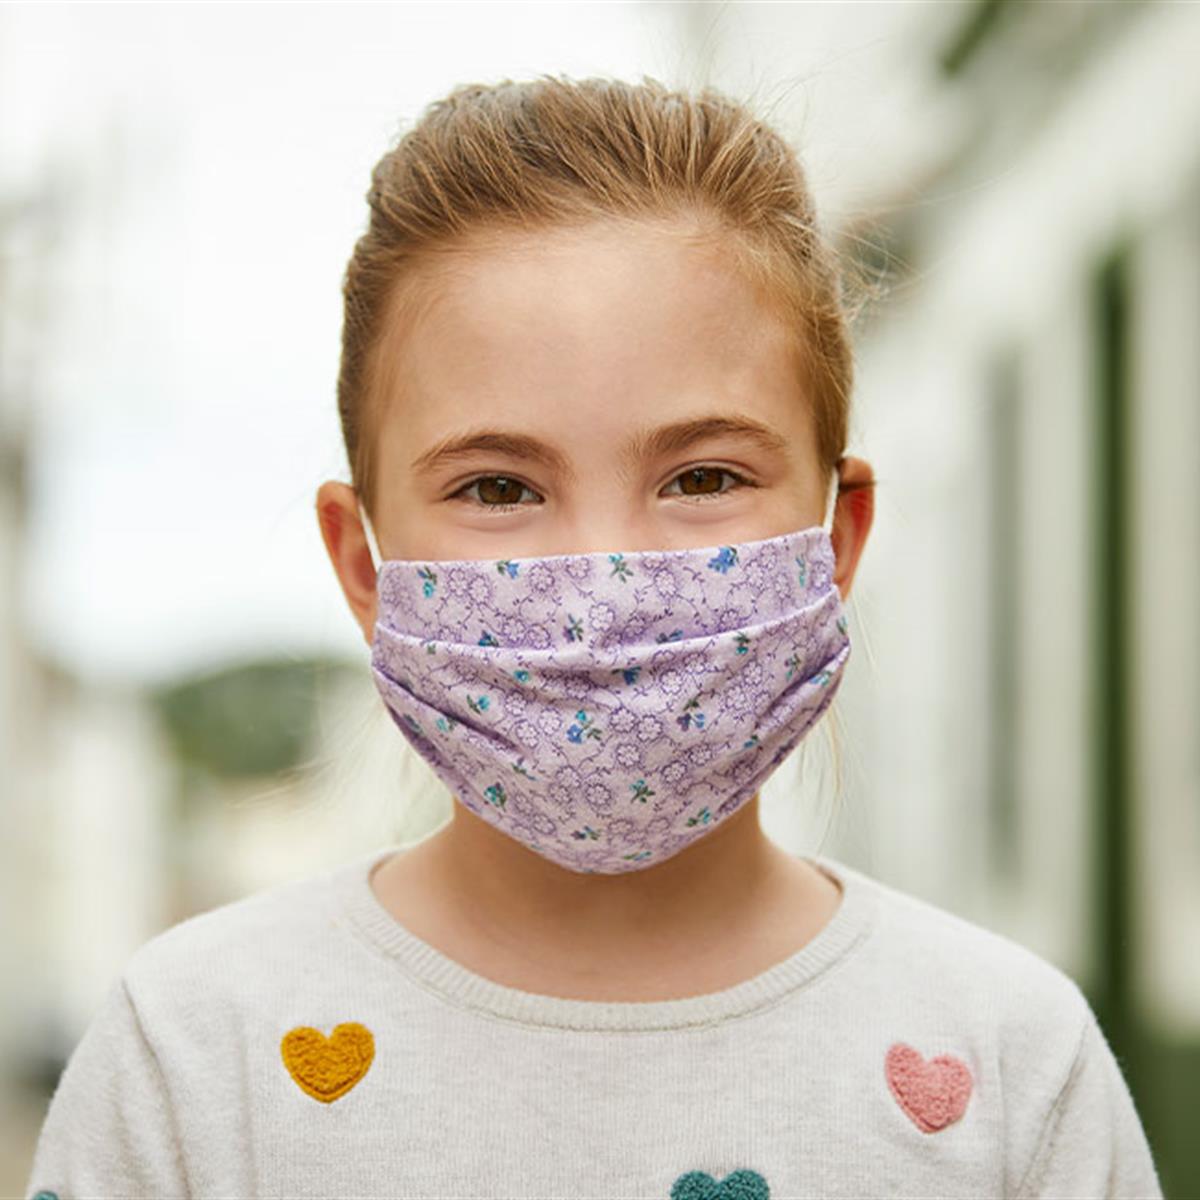 Mask Mythbusters: Common Questions about Kids &amp; Face Masks -  HealthyChildren.org